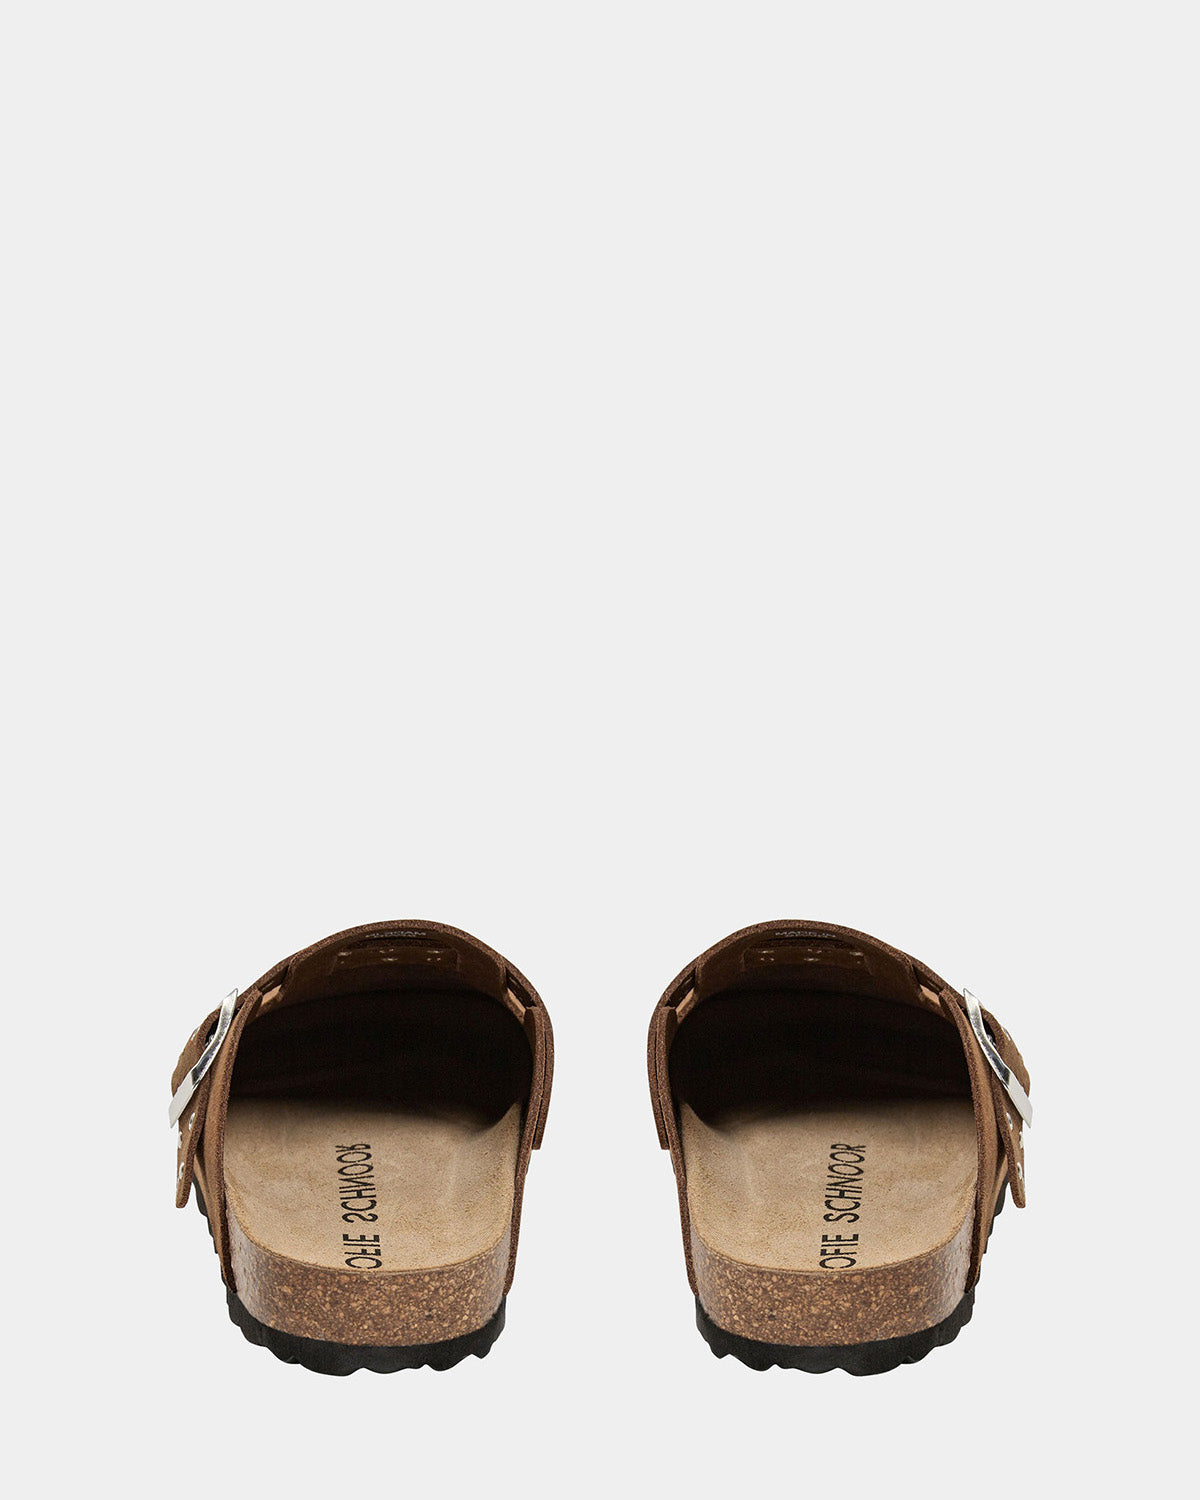 T416-Loafer-Date brown